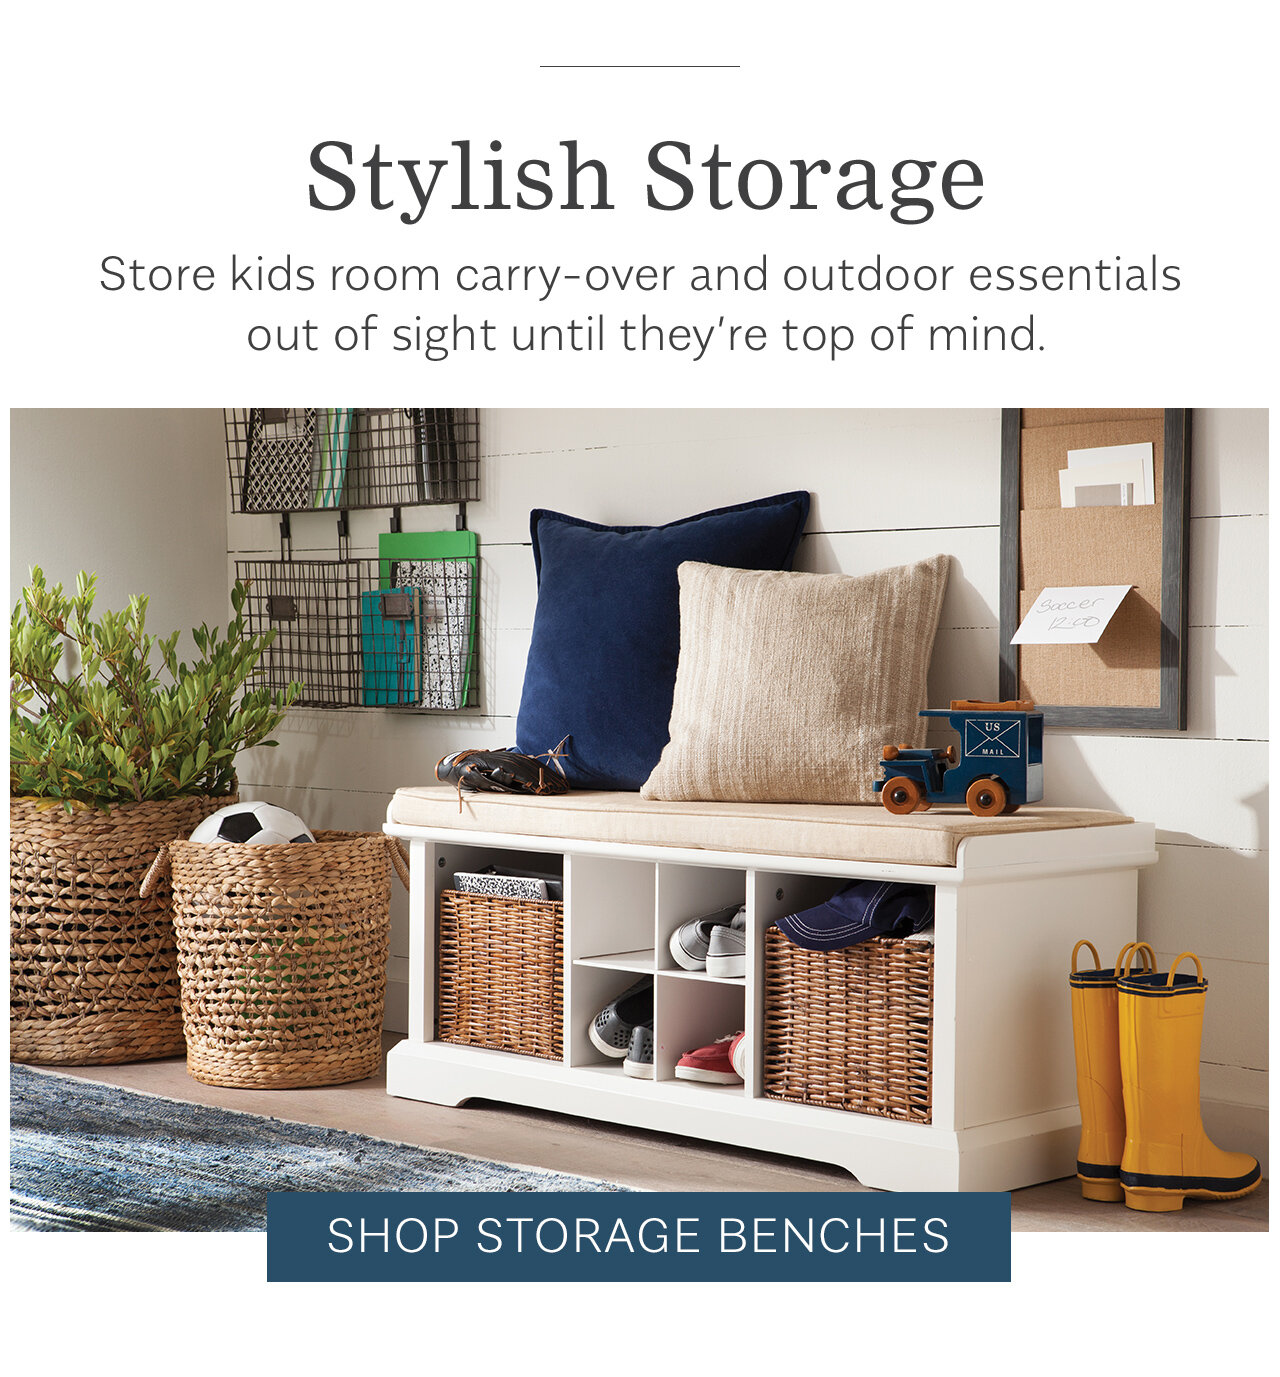 Stylish Storage Store kids room carry-over and outdoor essentials out of sight until they're top of mind. b T LN 